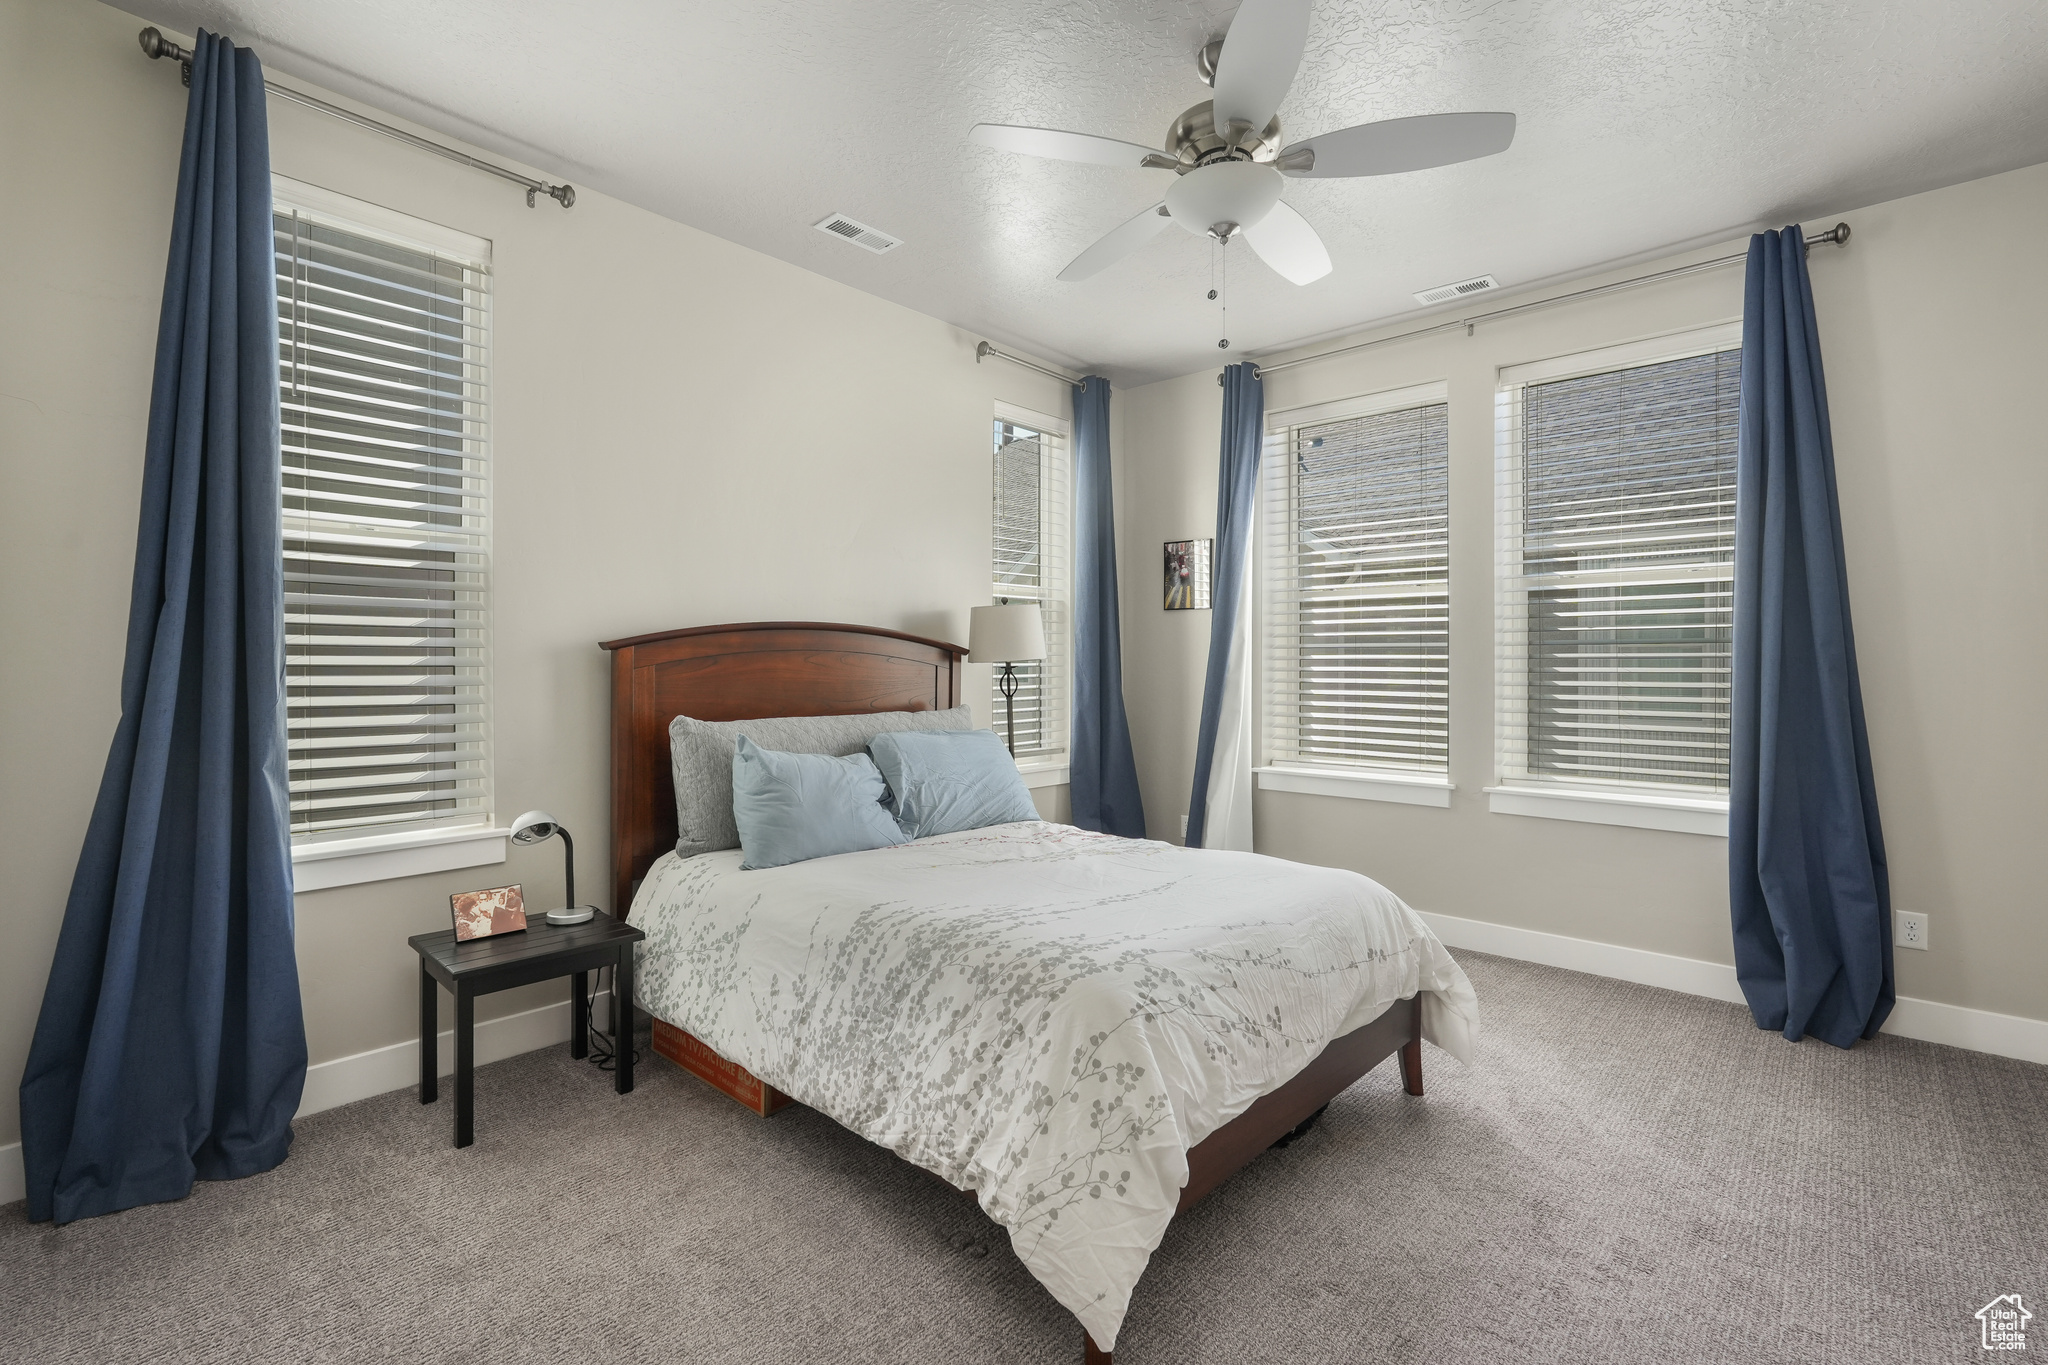 Master bedroom with large windows and ceiling fan